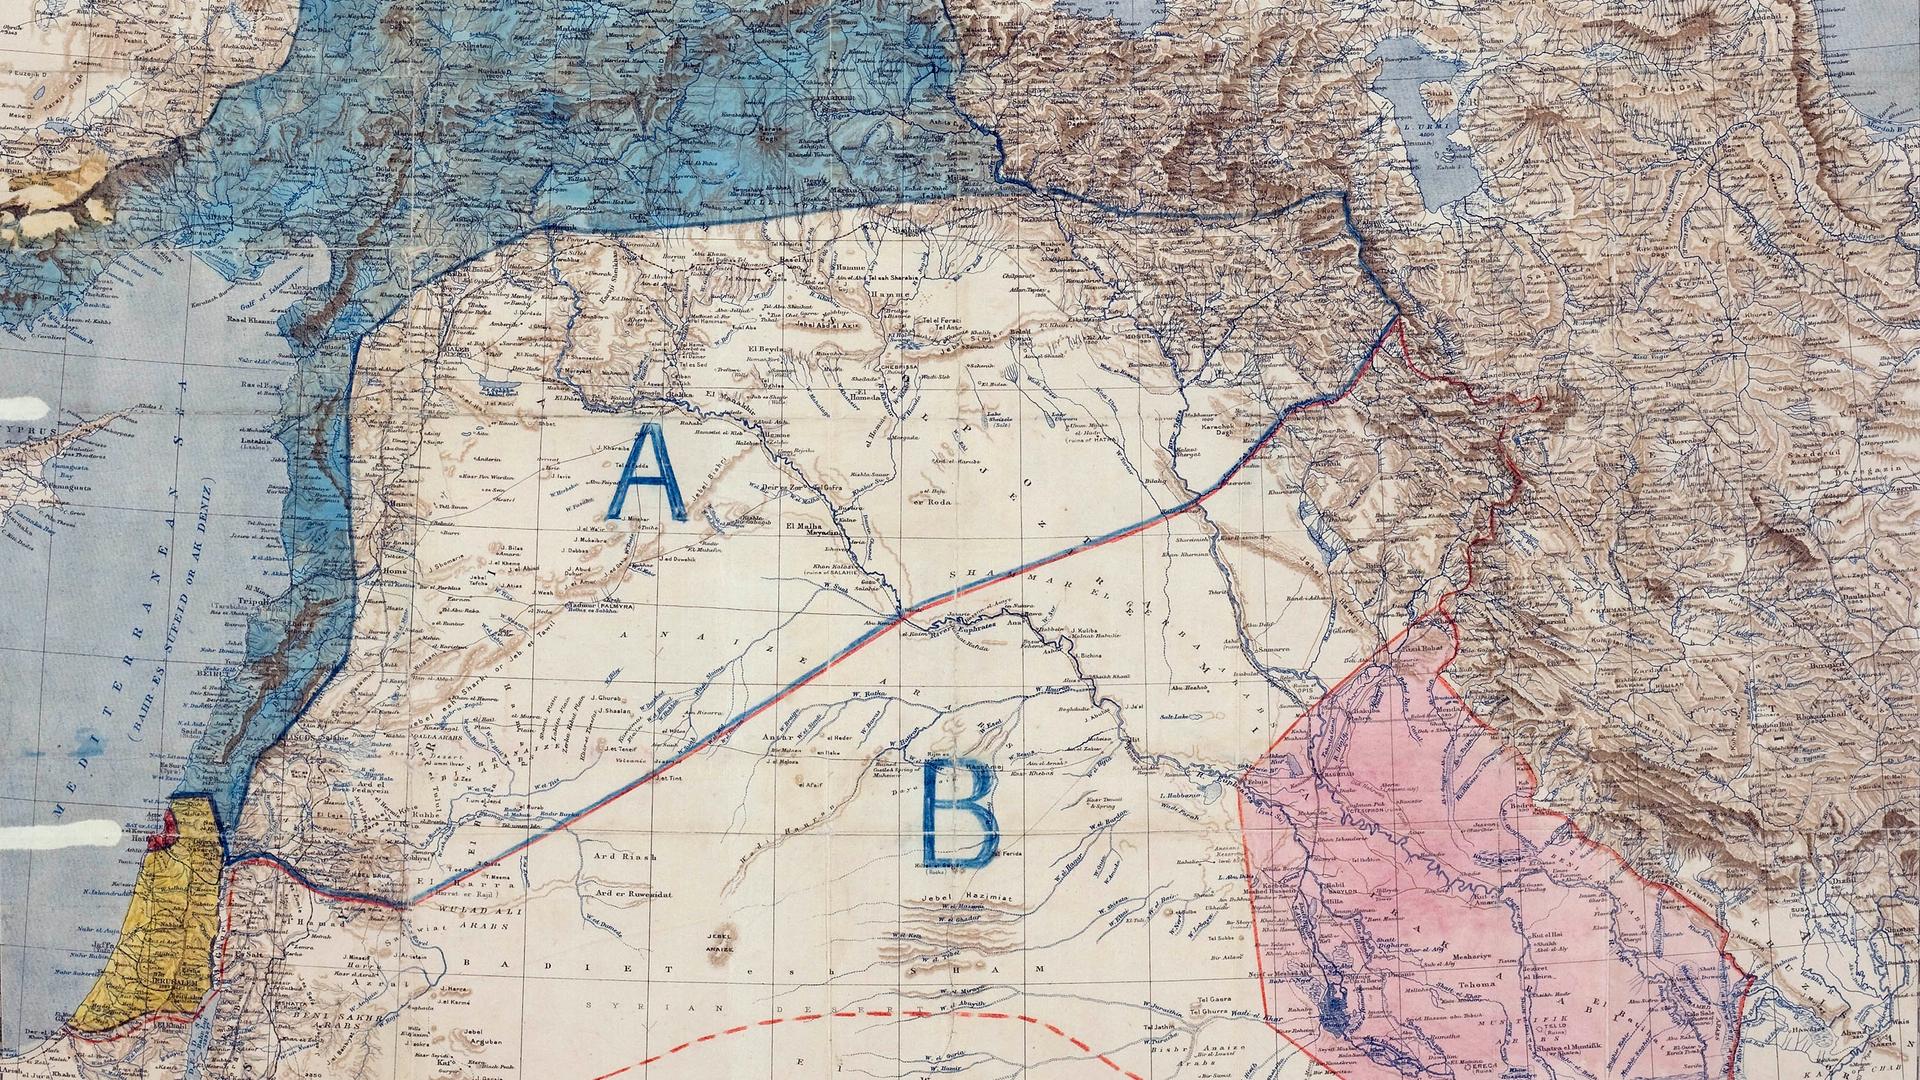 Map of Sykes-Picot Agreement. Royal Geographical Society, 1910-1915. Signed by Mark Sykes and Francois Georges-Picot, 8 May 1916.